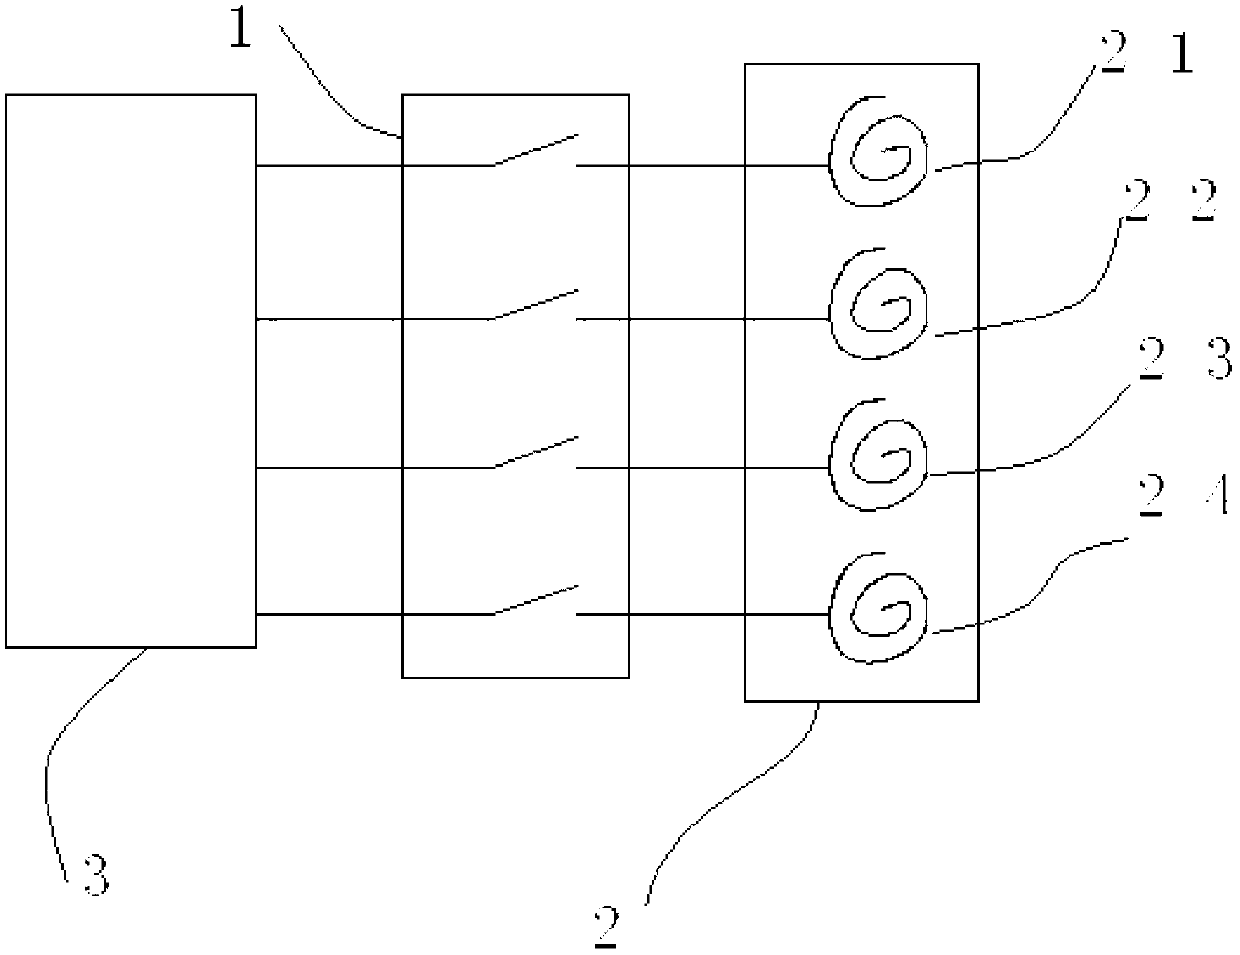 Induction heating system with external combined induction heating coil phased arrays and application for induction heating system